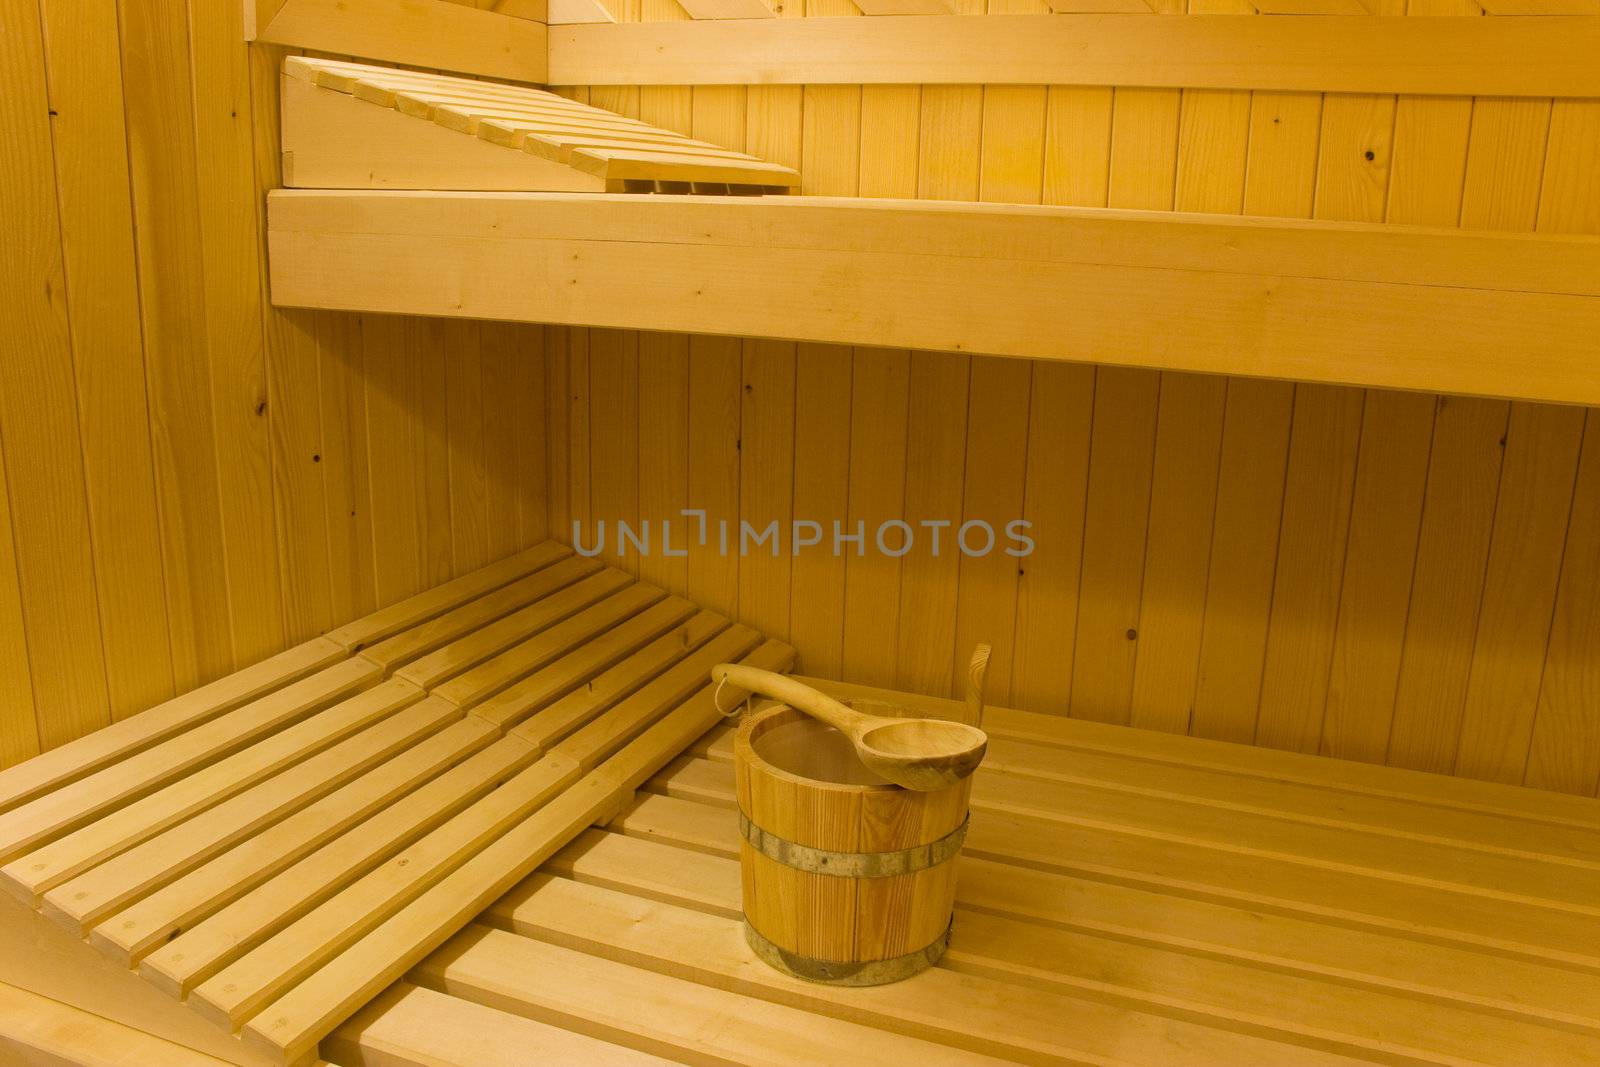 Bucket for water and pillows on benches in Finnish sauna.